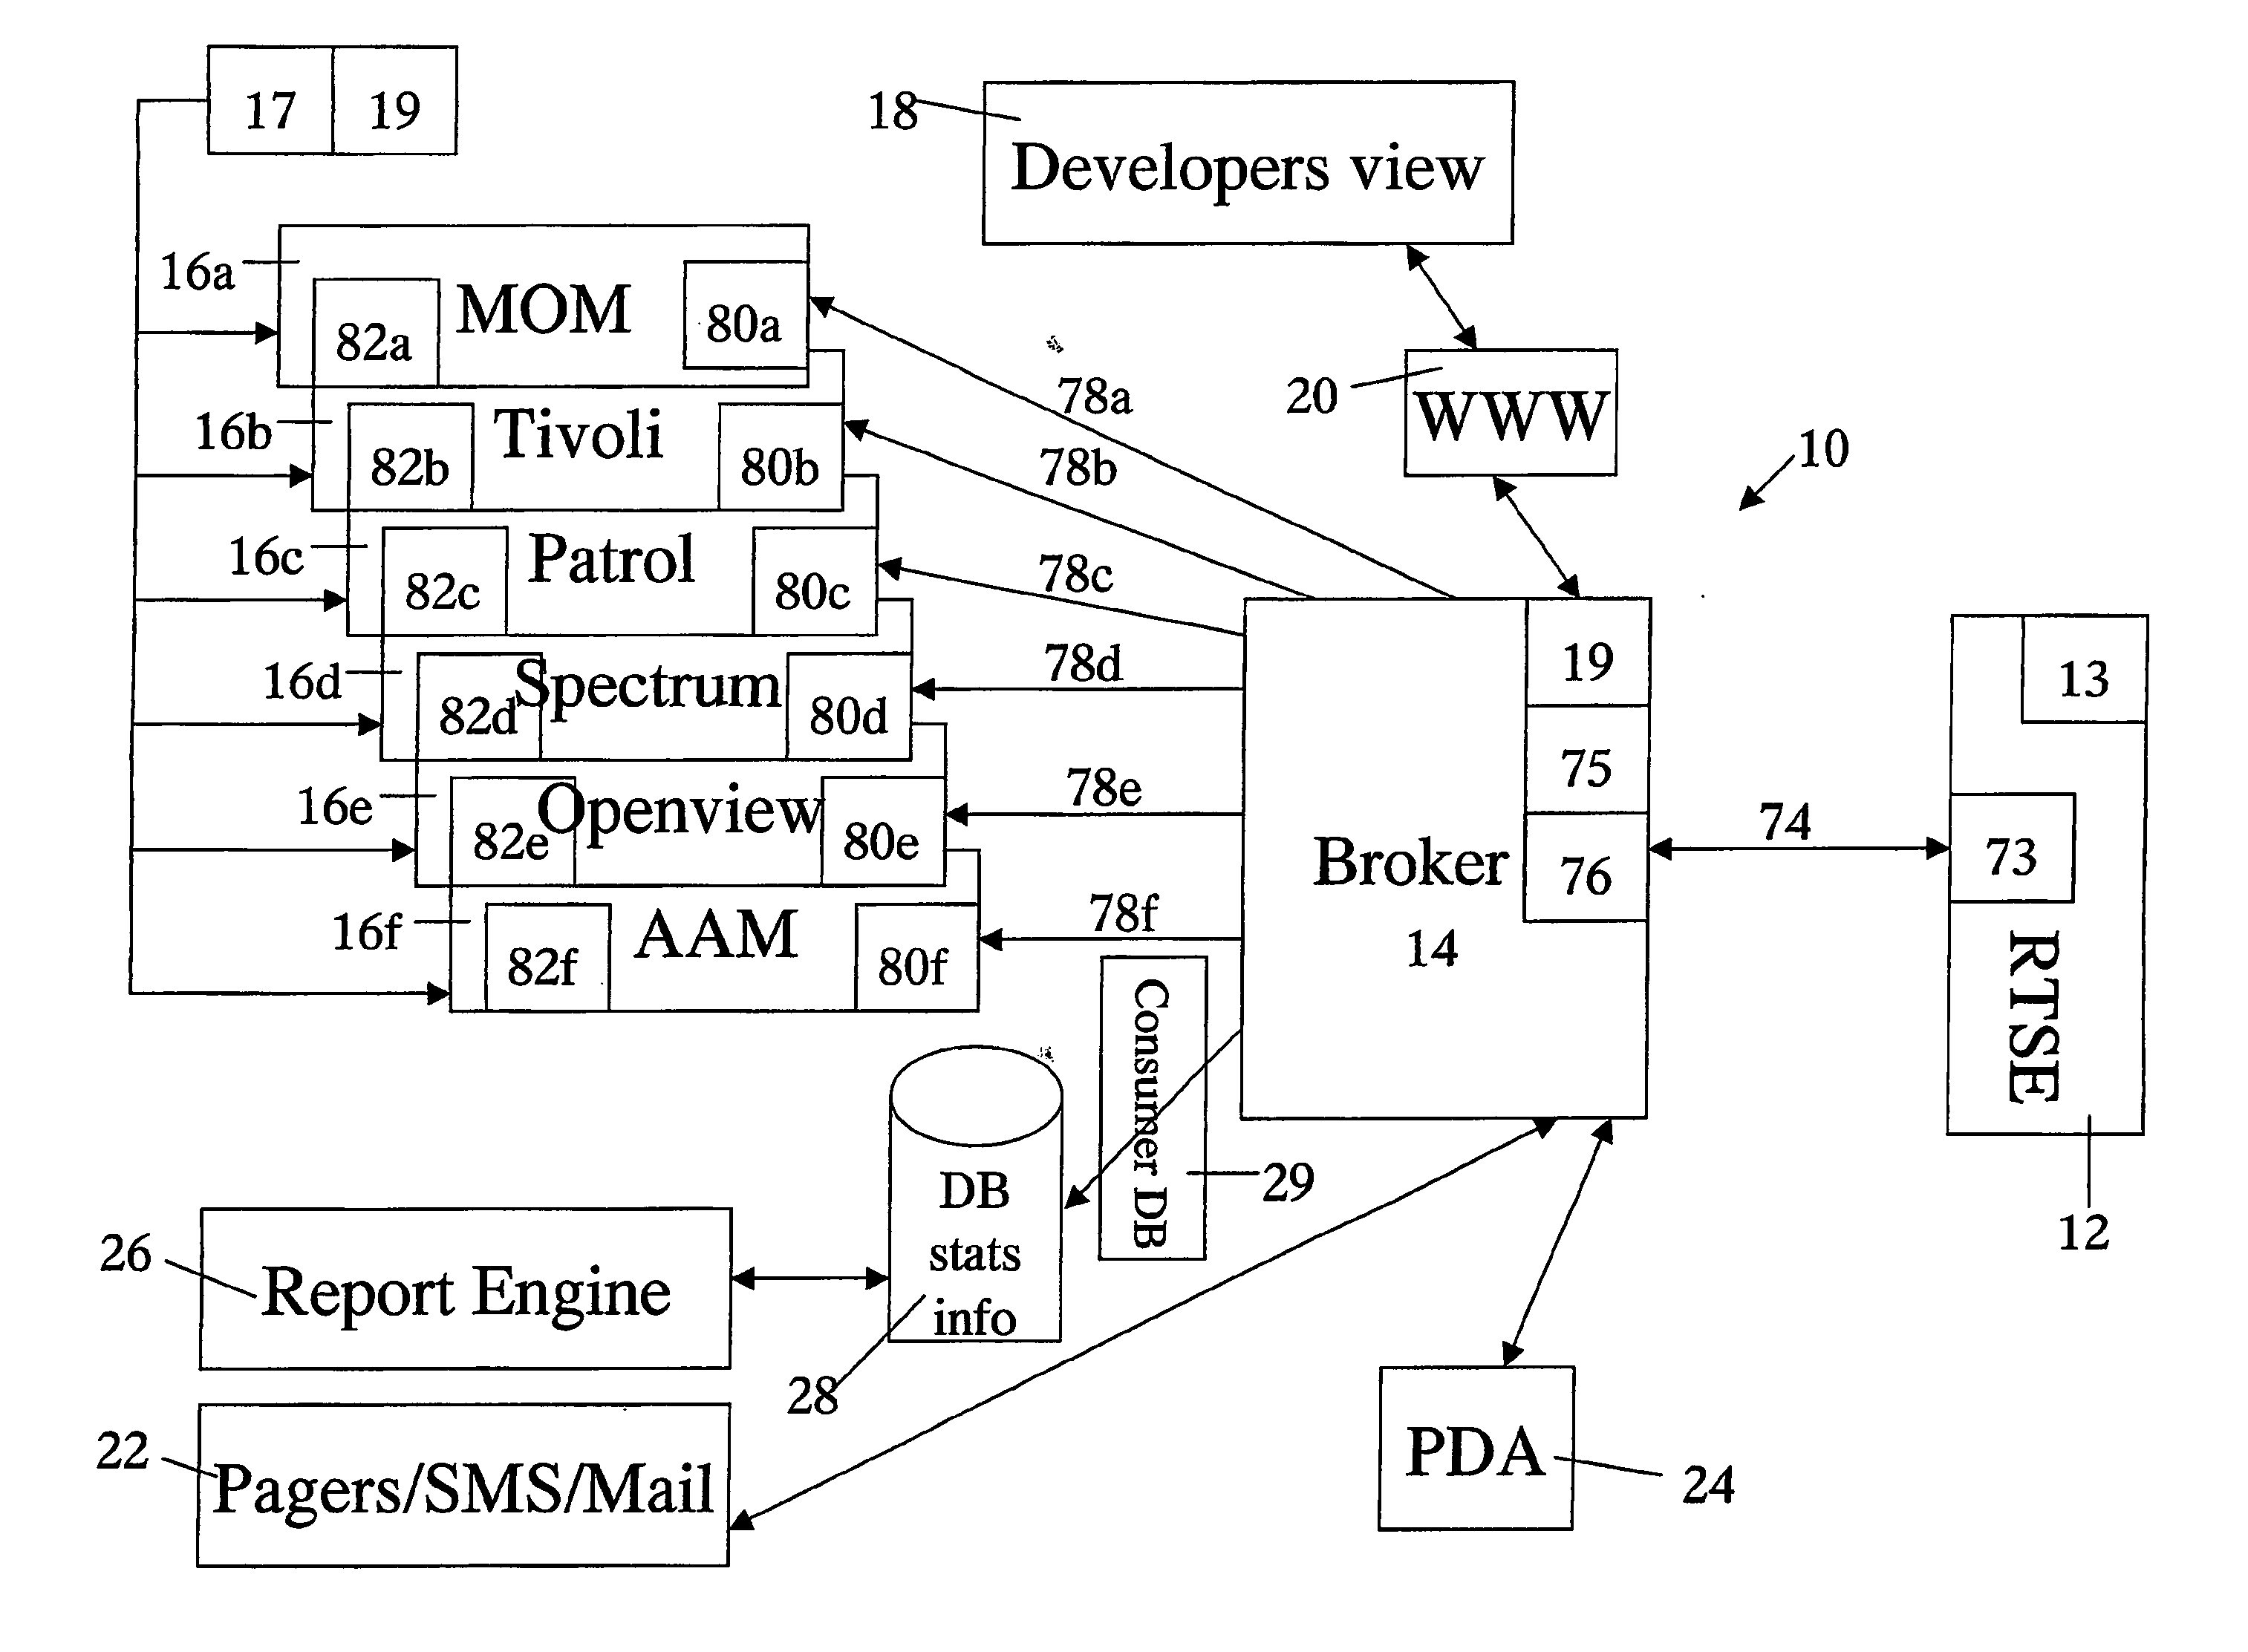 Method for monitoring and managing an information system